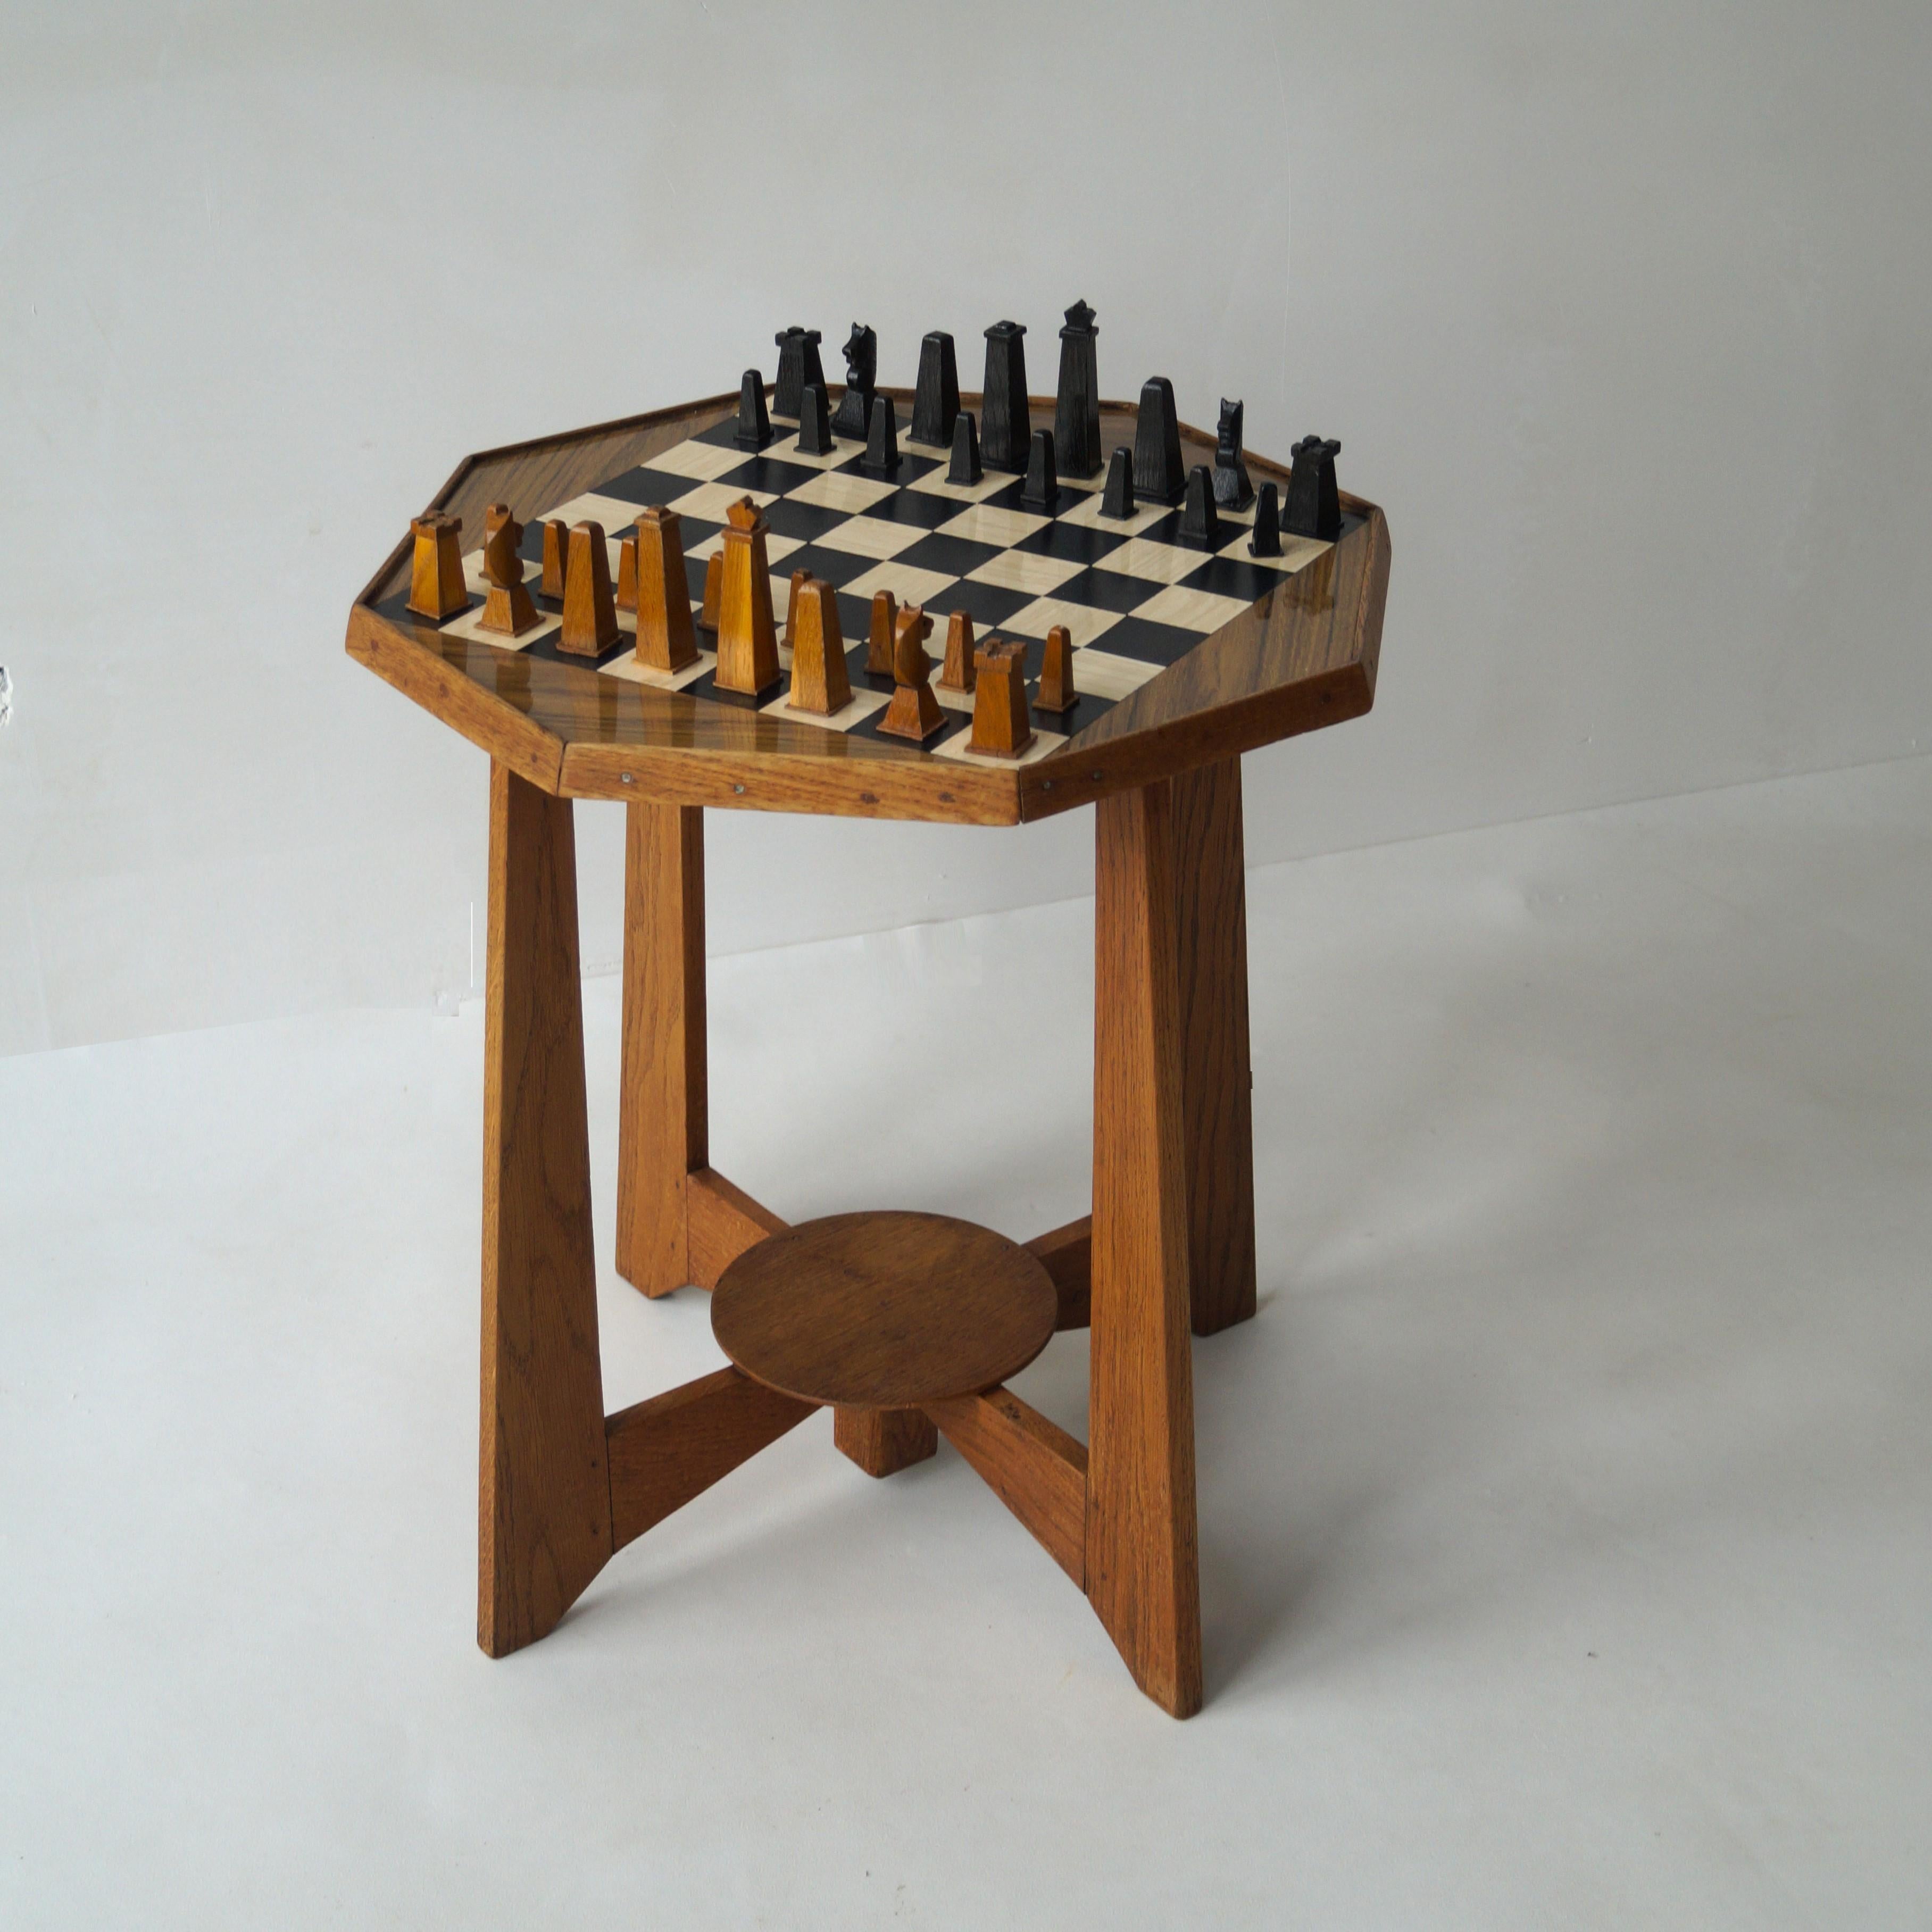 A modernist - Dutch Art Deco one of a kind octagonal chess table with inlay of formica. Estimated around the 1950s to 60s, because the chess board is in formica, a sort of plastic, well known from the West German plant table tops.

The base of the